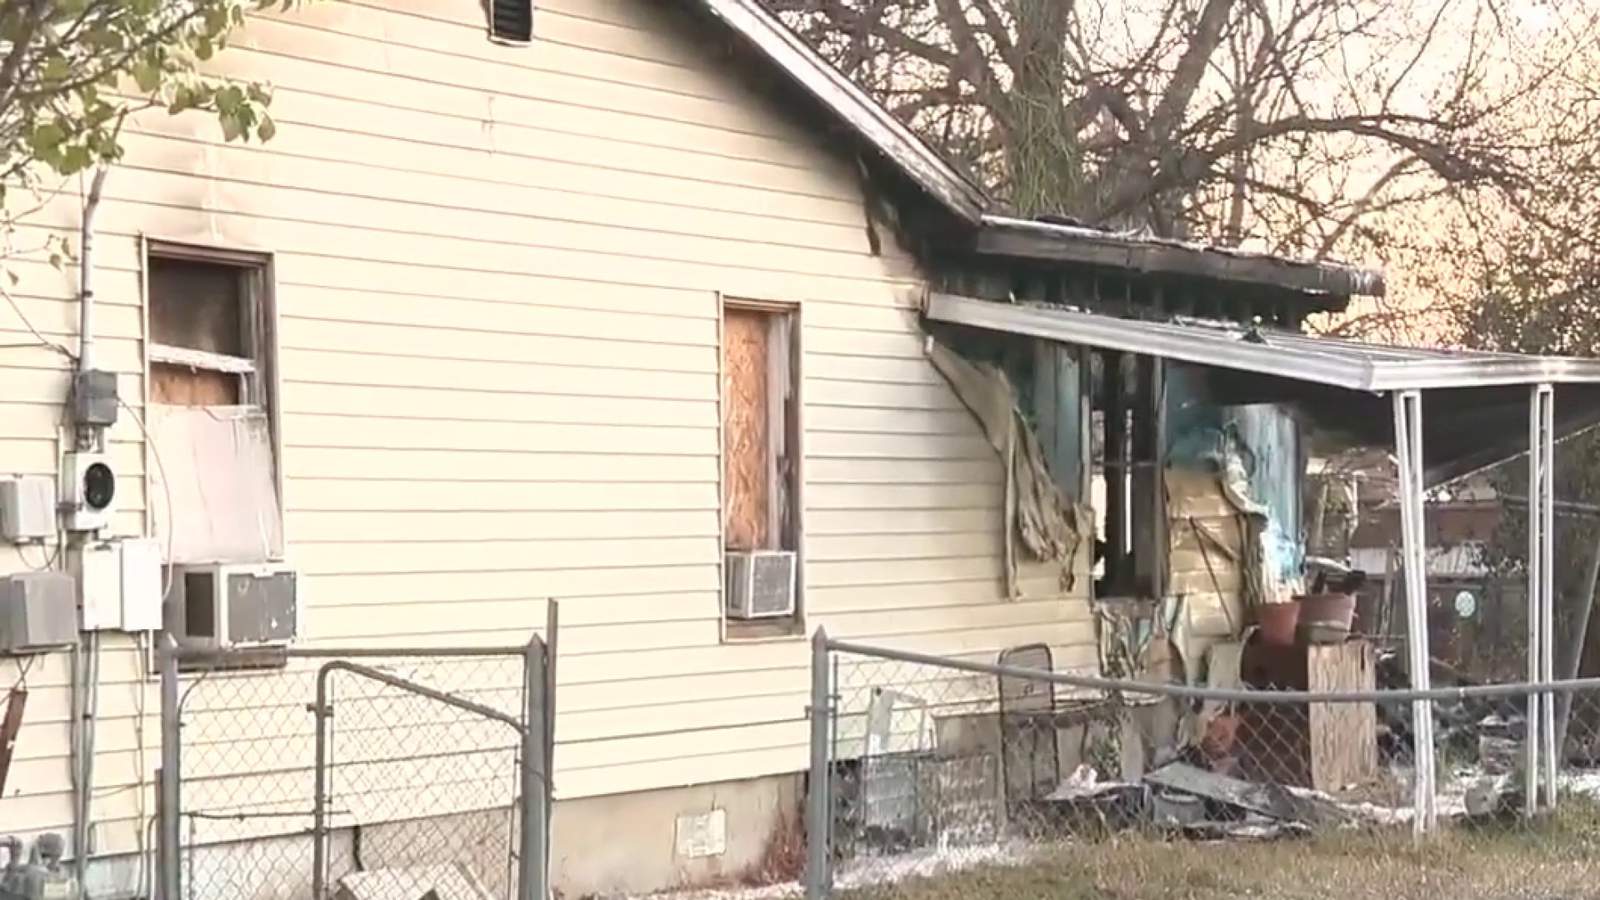 Arson suspected in fire that killed dog on San Antonio’s West Side